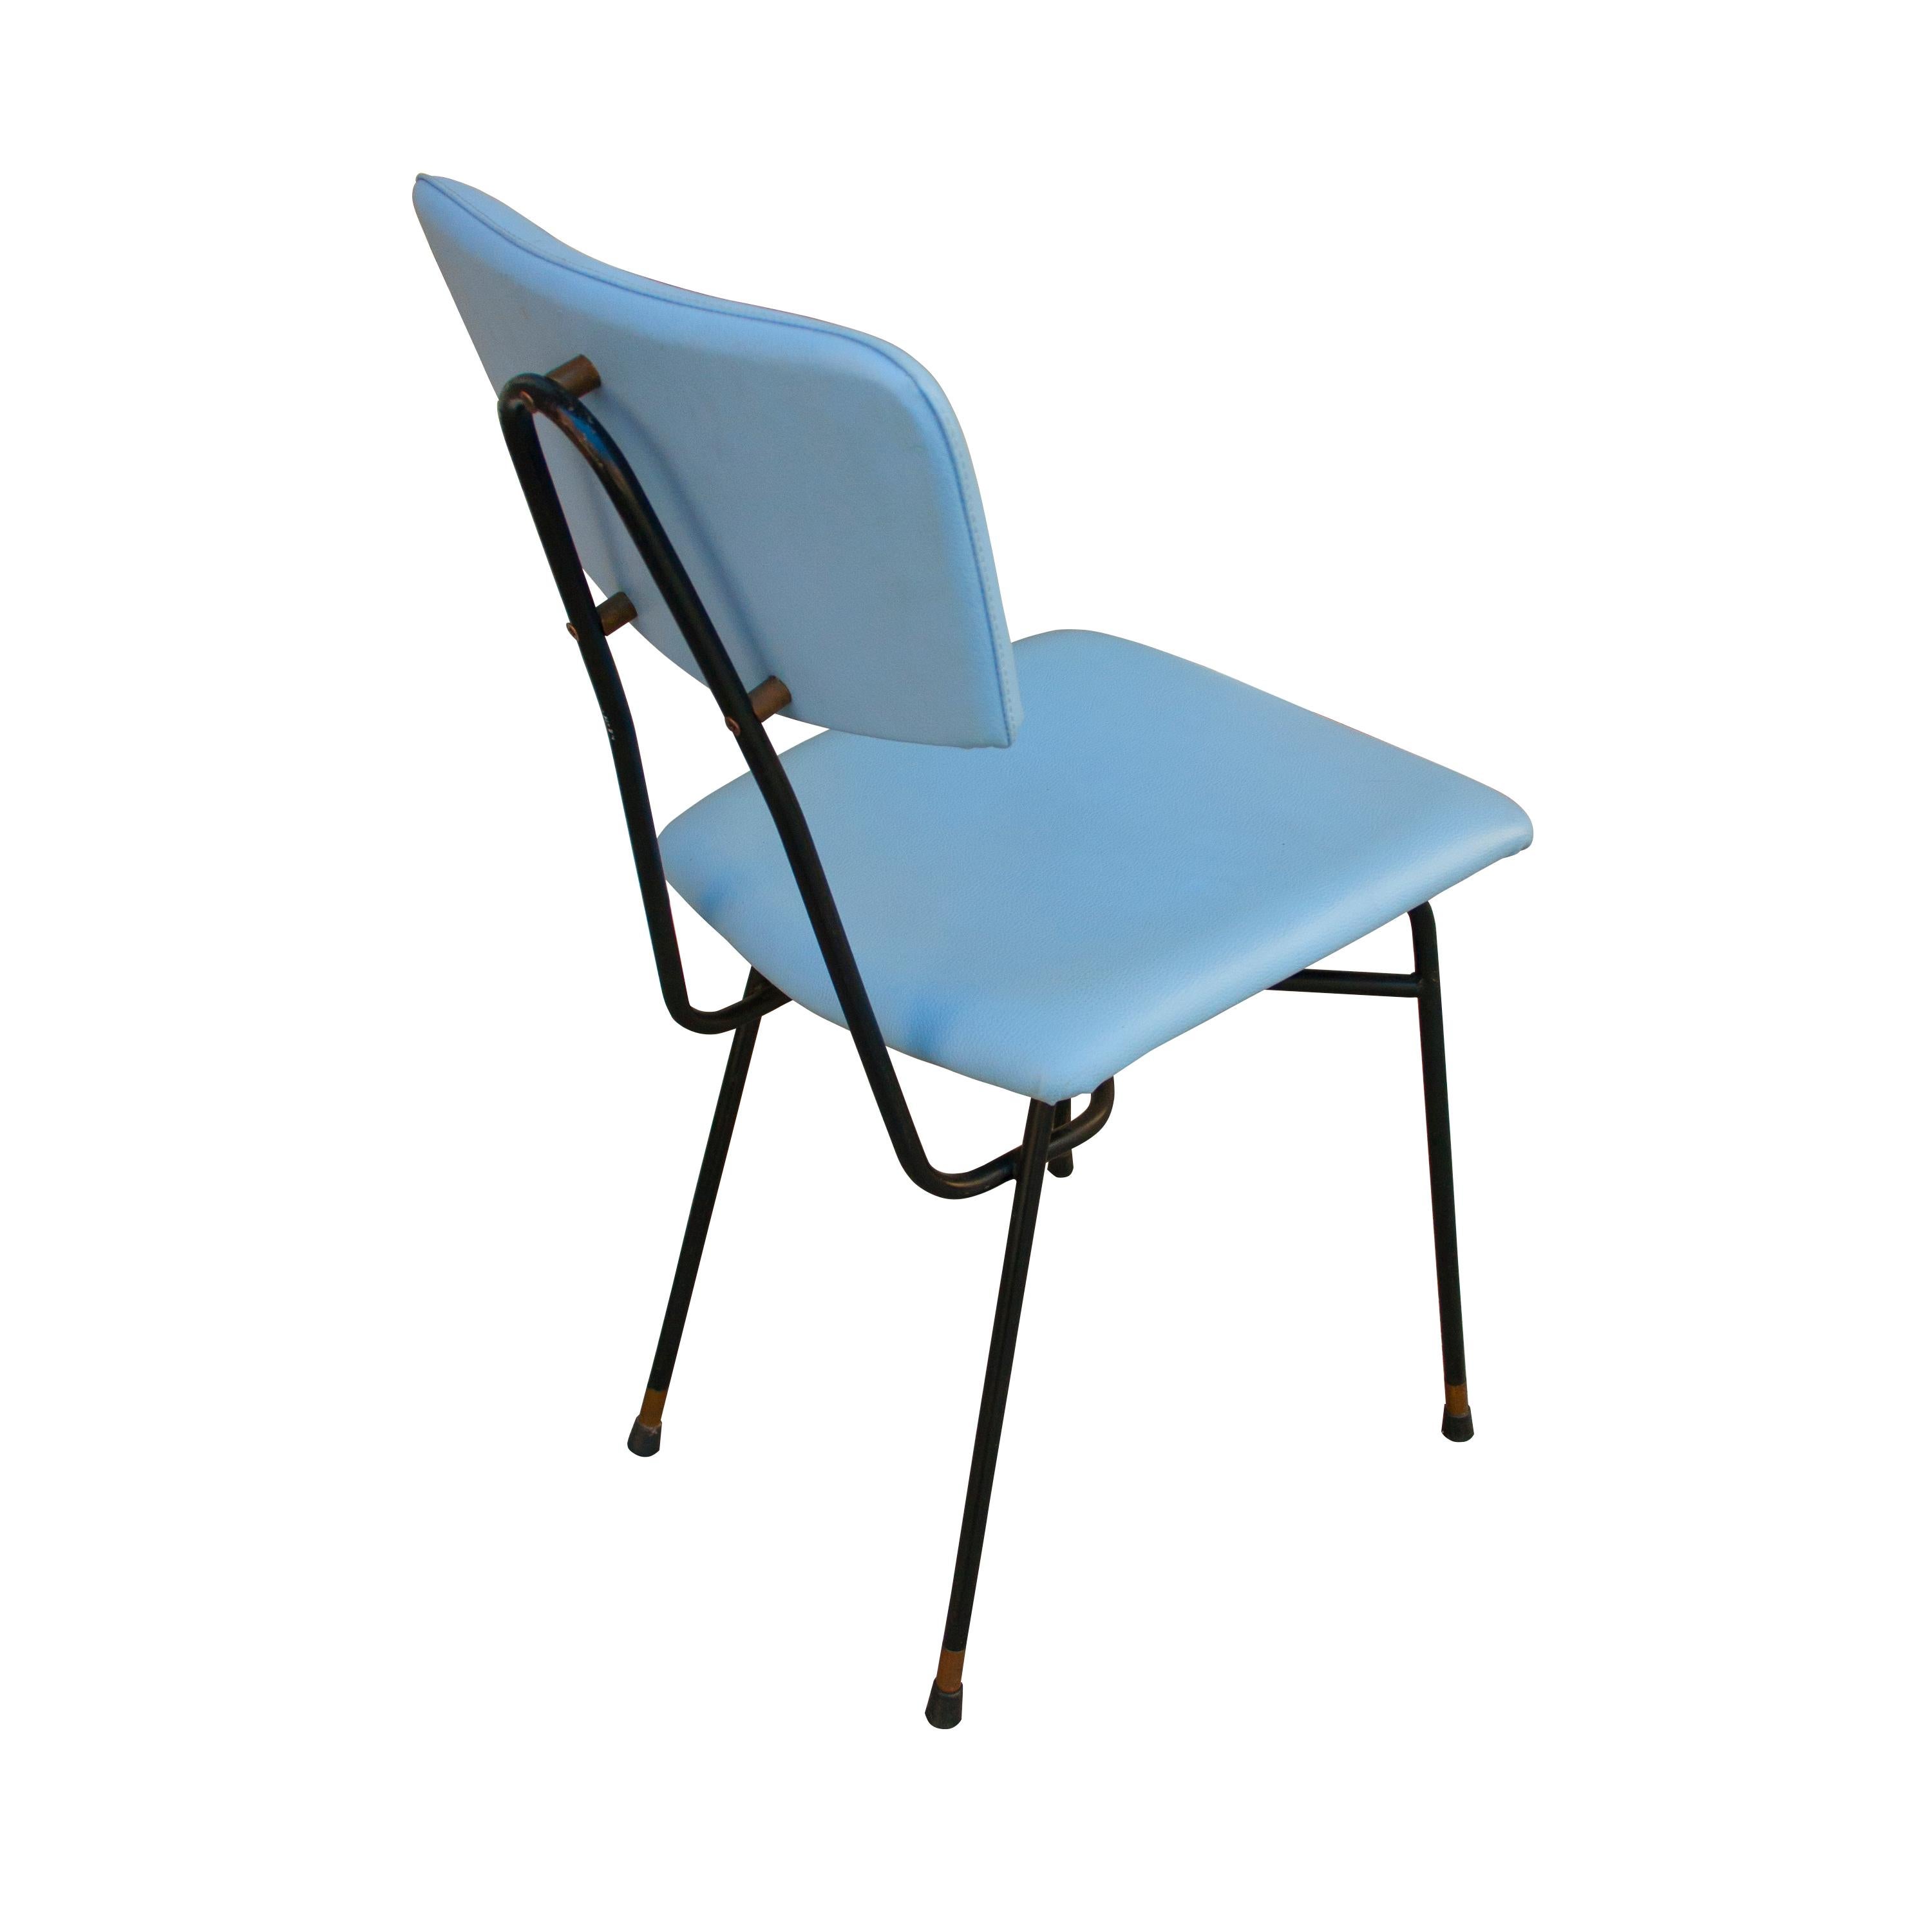 Luigi Scremin 10 Chairs Set Blue Leatherette and Melalic Structure, Italy, 1950 In Good Condition For Sale In Madrid, ES